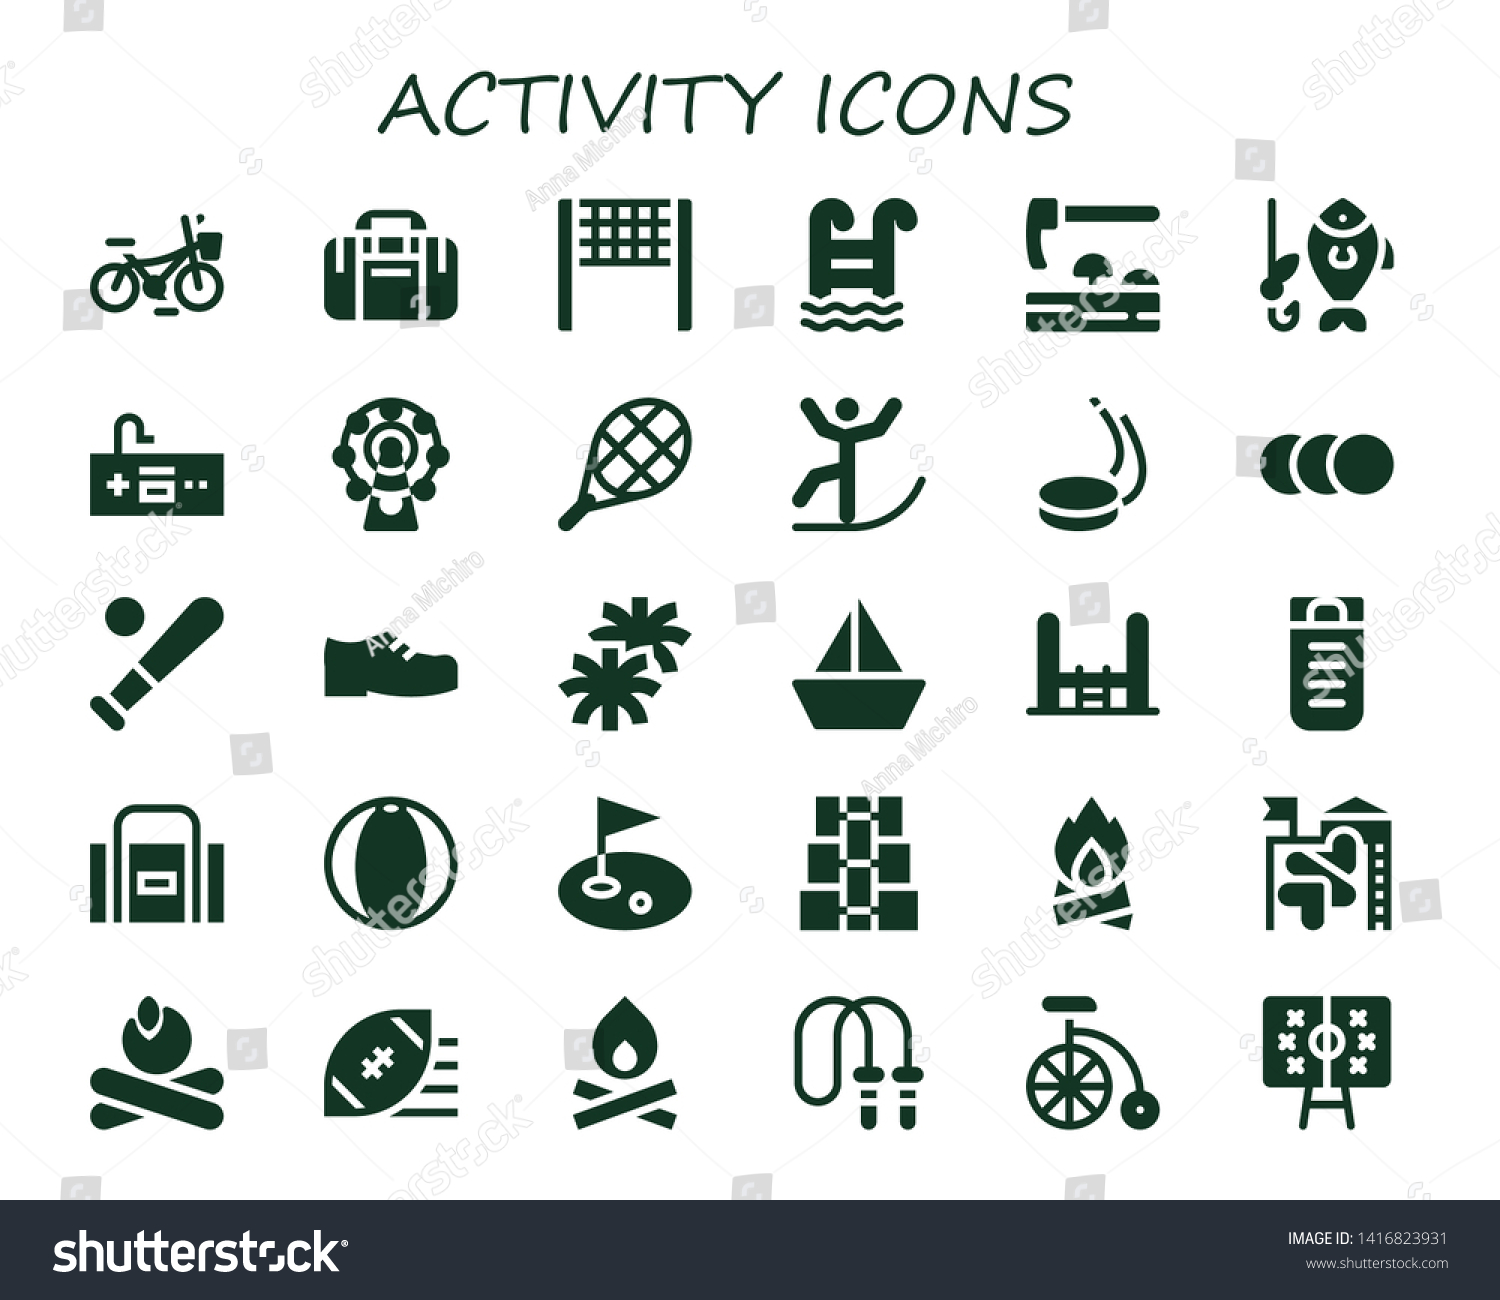 SVG of activity icon set. 30 filled activity icons.  Simple modern icons about  - Bicycle, Sport bag, Volleyball net, Swimming pool, Adze, Fishing, Gamepad, Ferris wheel, Tennis, Skiing svg